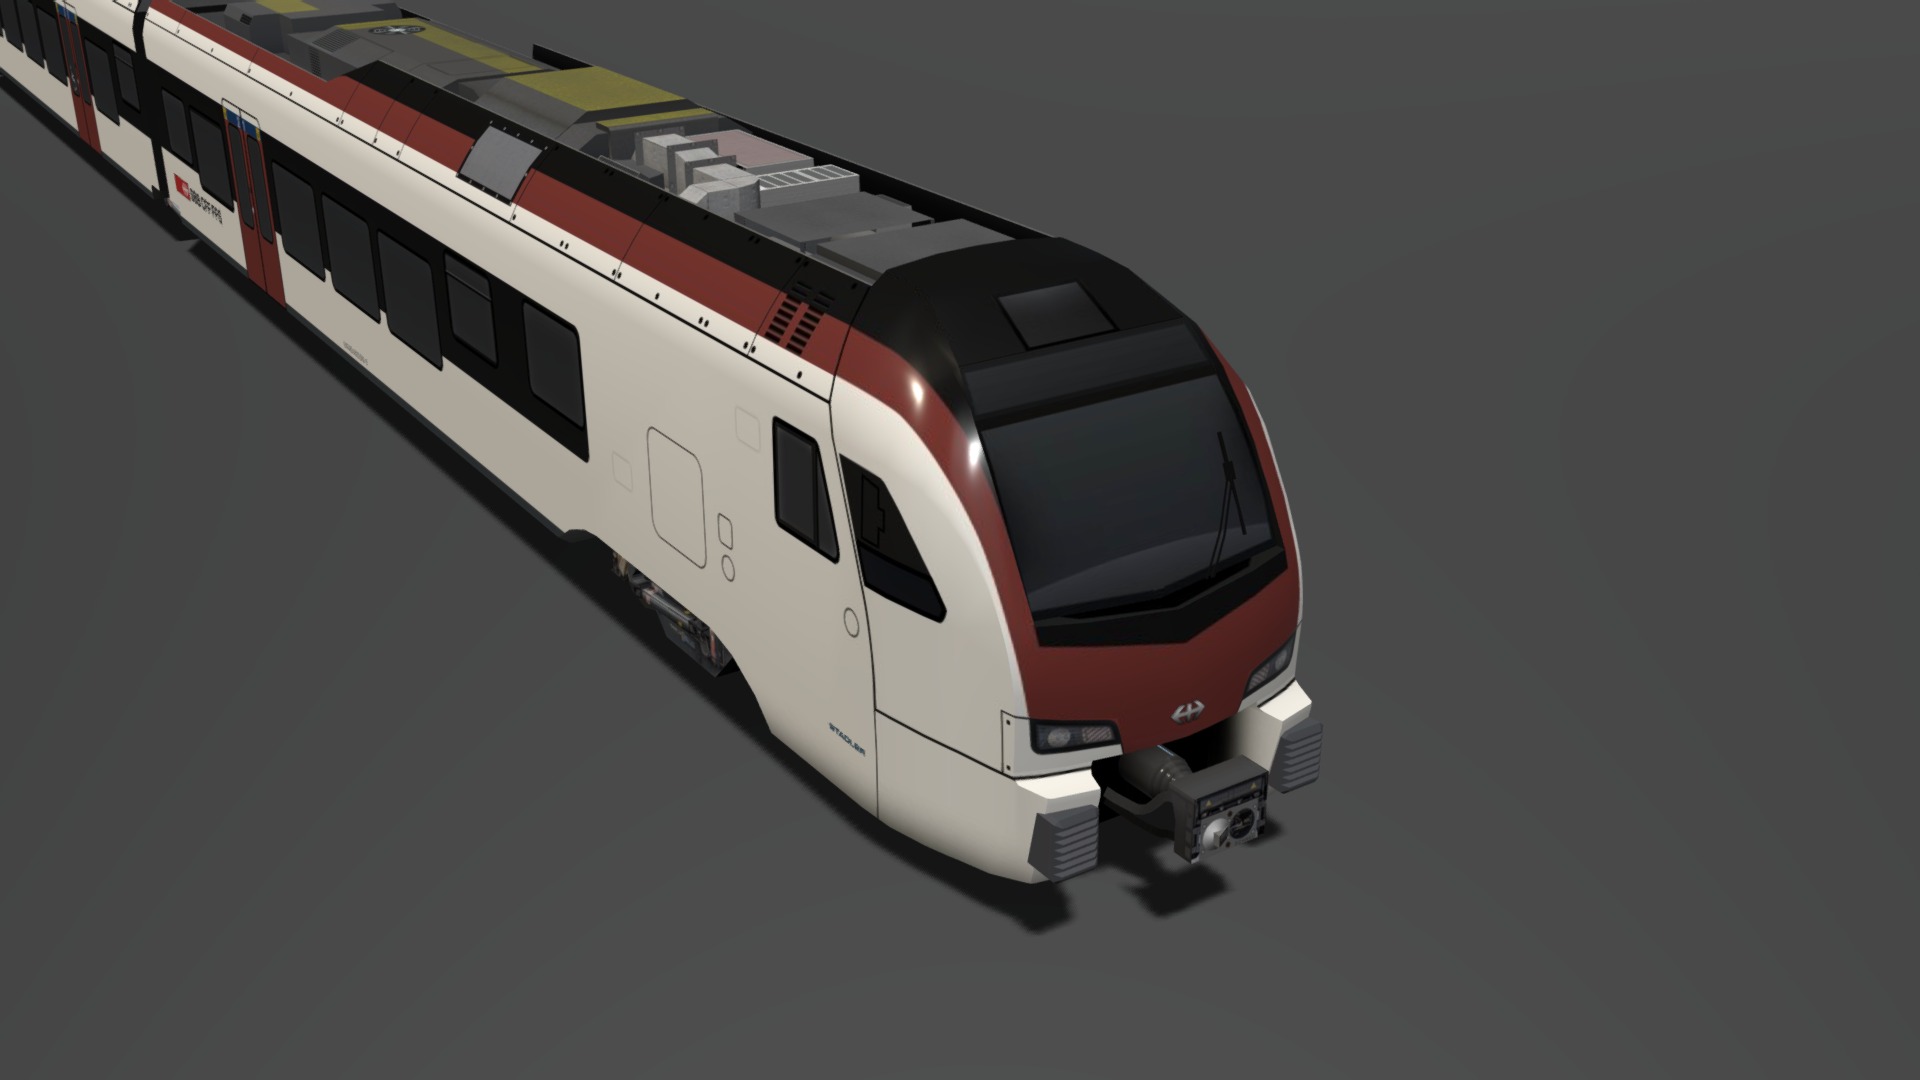 3D model STADLER FLIRT3 – SBB CFF FFS - This is a 3D model of the STADLER FLIRT3 - SBB CFF FFS. The 3D model is about a white and red train.